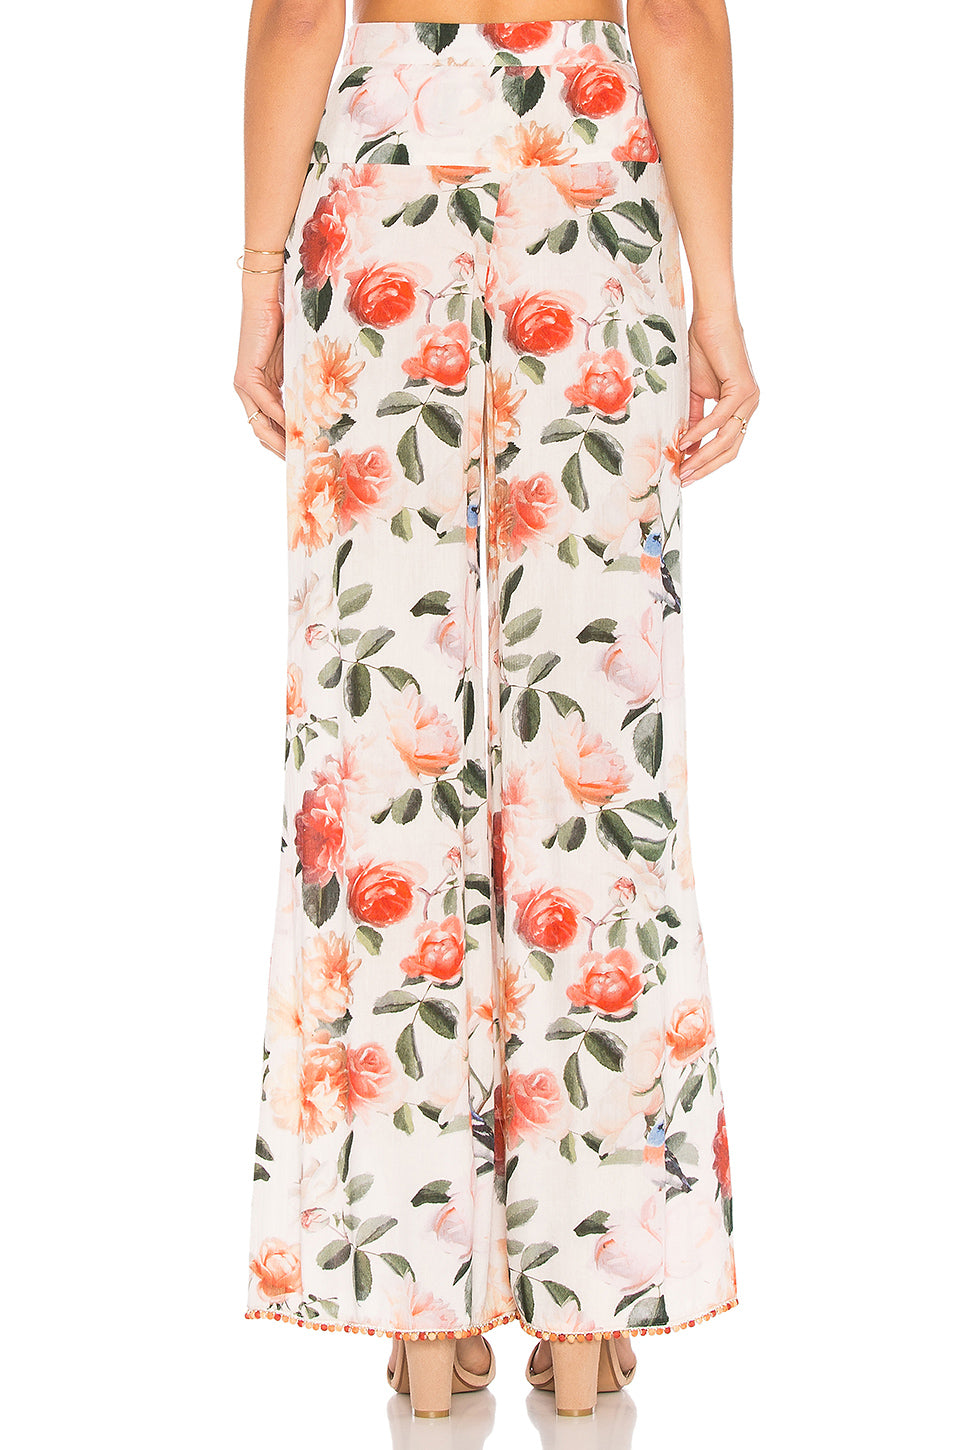 Lillian Pant in PEACH FLORAL